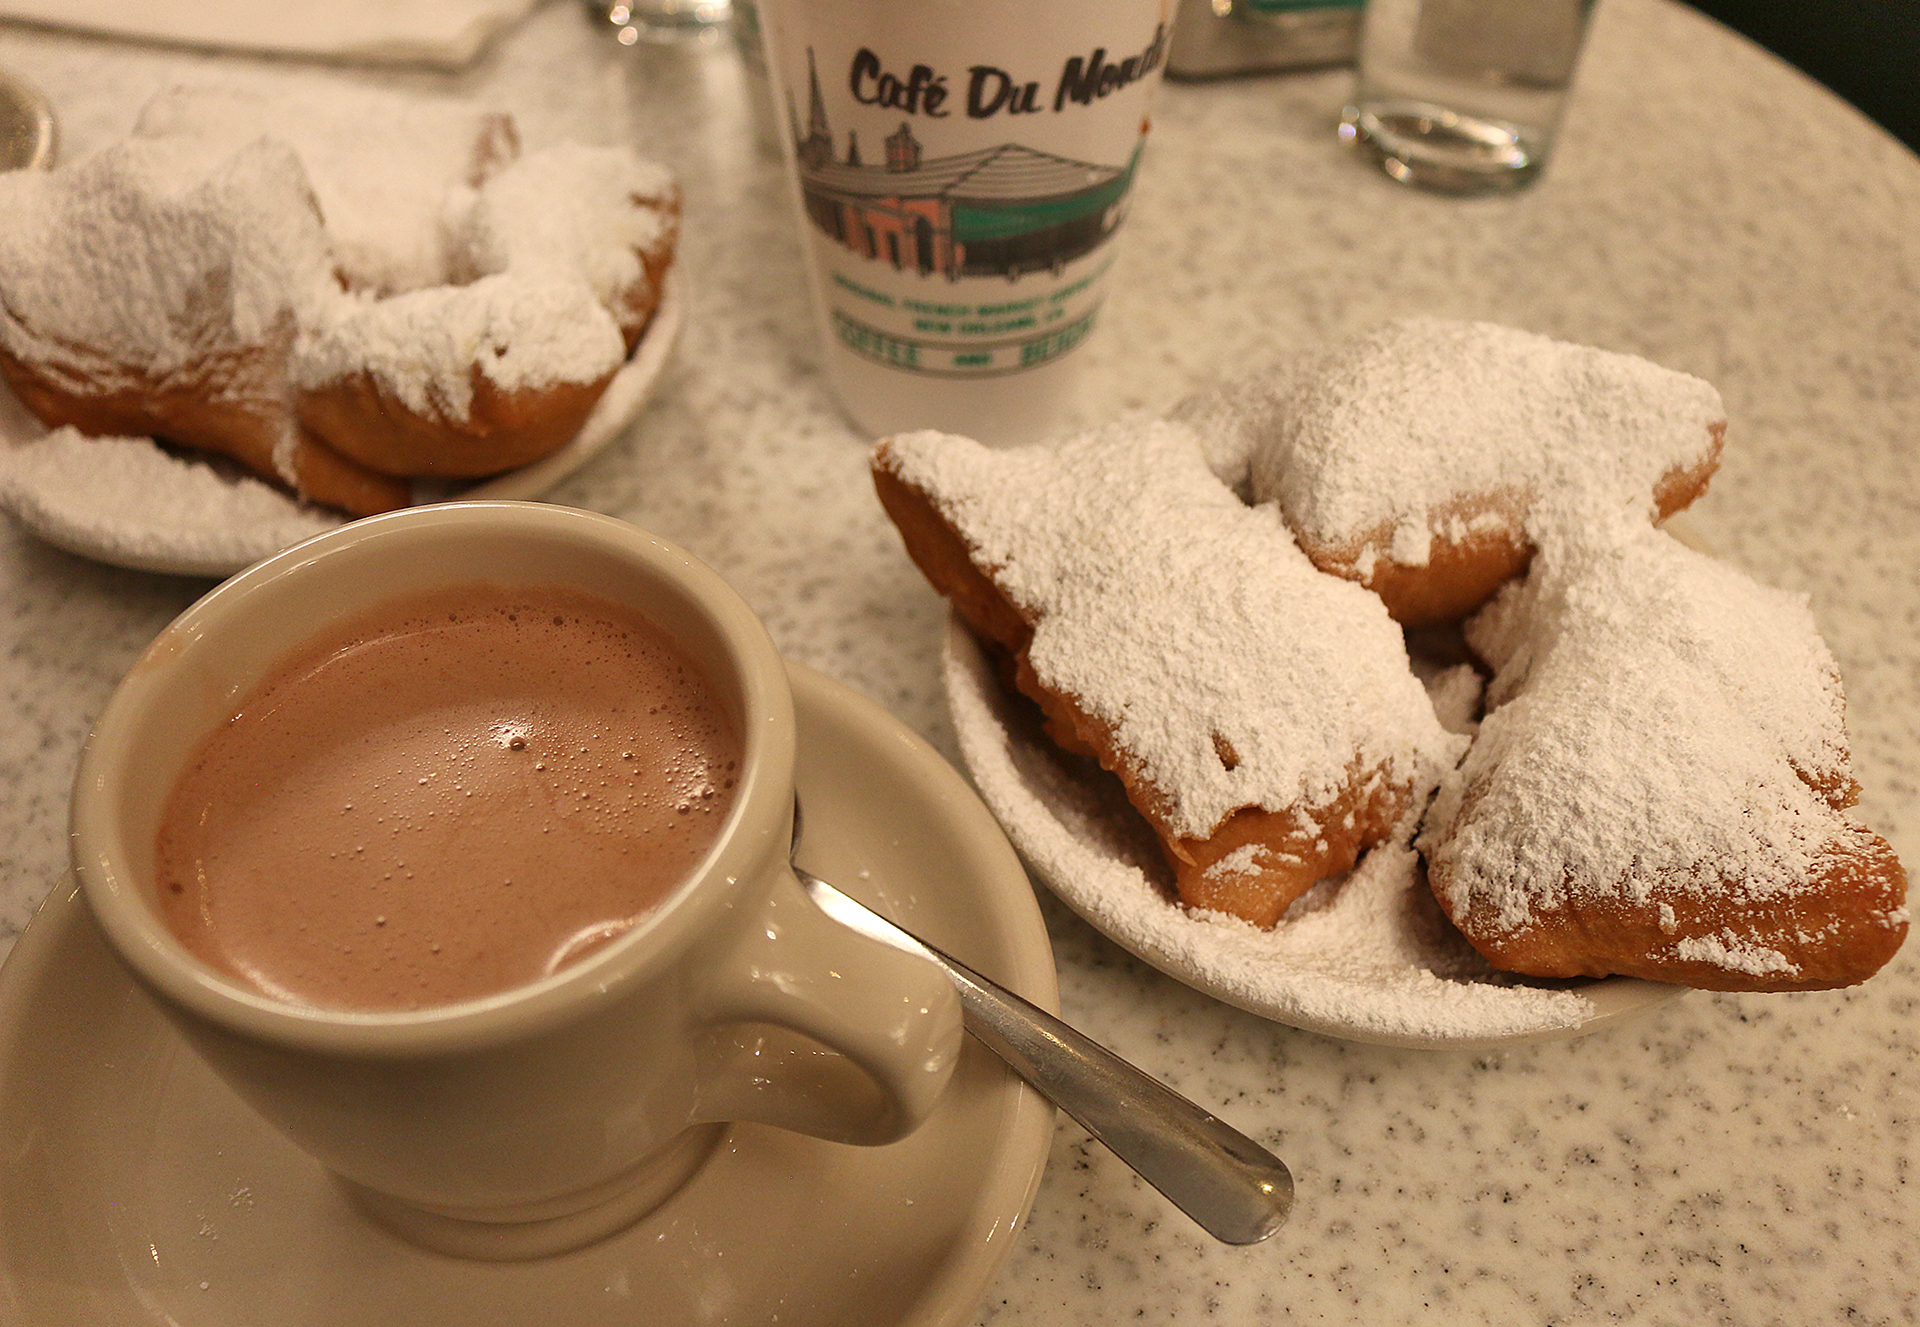 a plate of pastries and a cup of hot chocolate